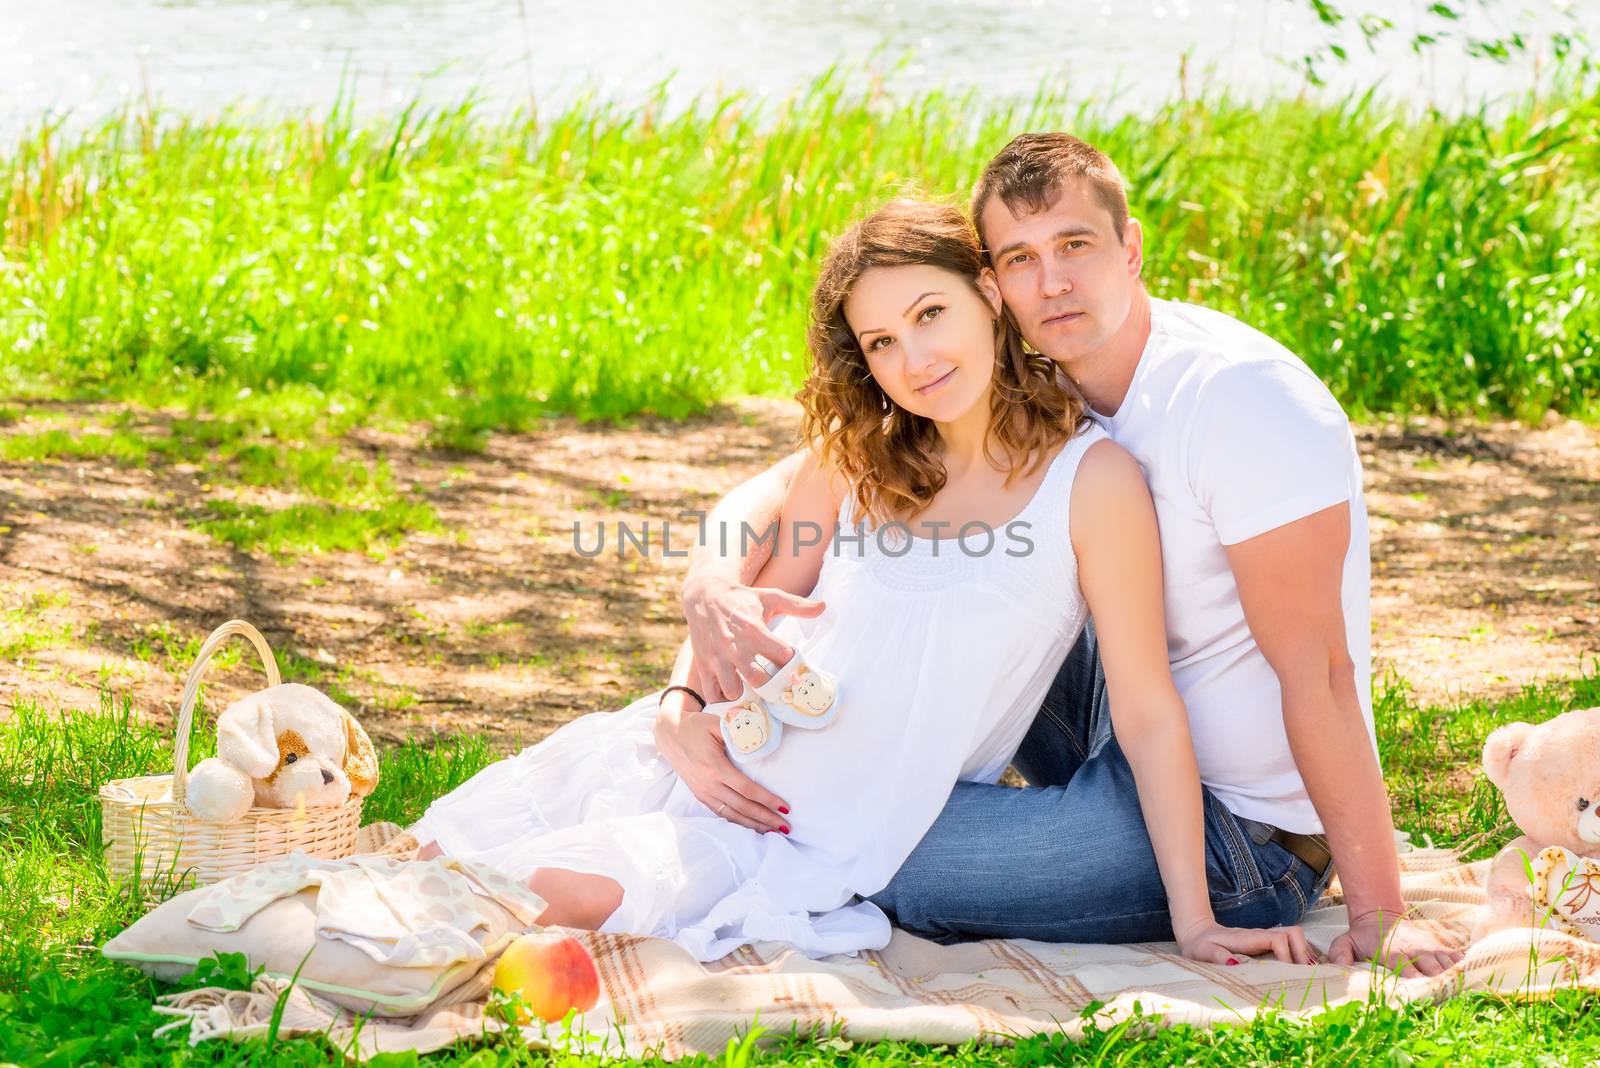 Picnic near the lake, young pregnant couple on a plaid by kosmsos111